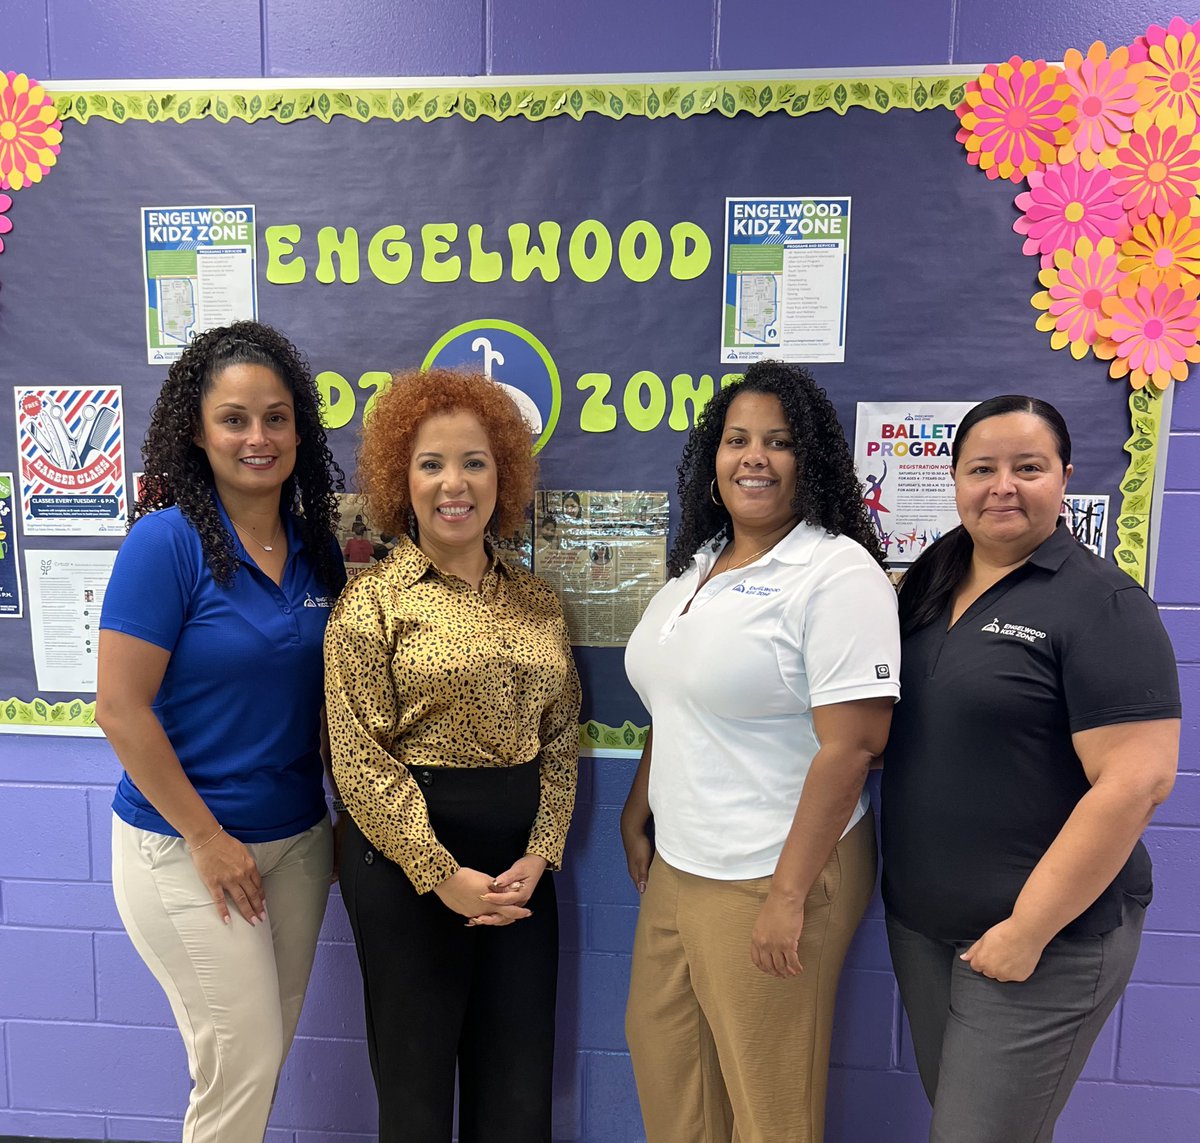 So proud of my former student from @CHS_OCPS School-OCPS, Alexandra!! She is leading the great program of Kids Zone in Engelwood Neighborhood Center for Families. So excited to see the leadership of our students’ advocates to make a difference in our community! #sisepuede